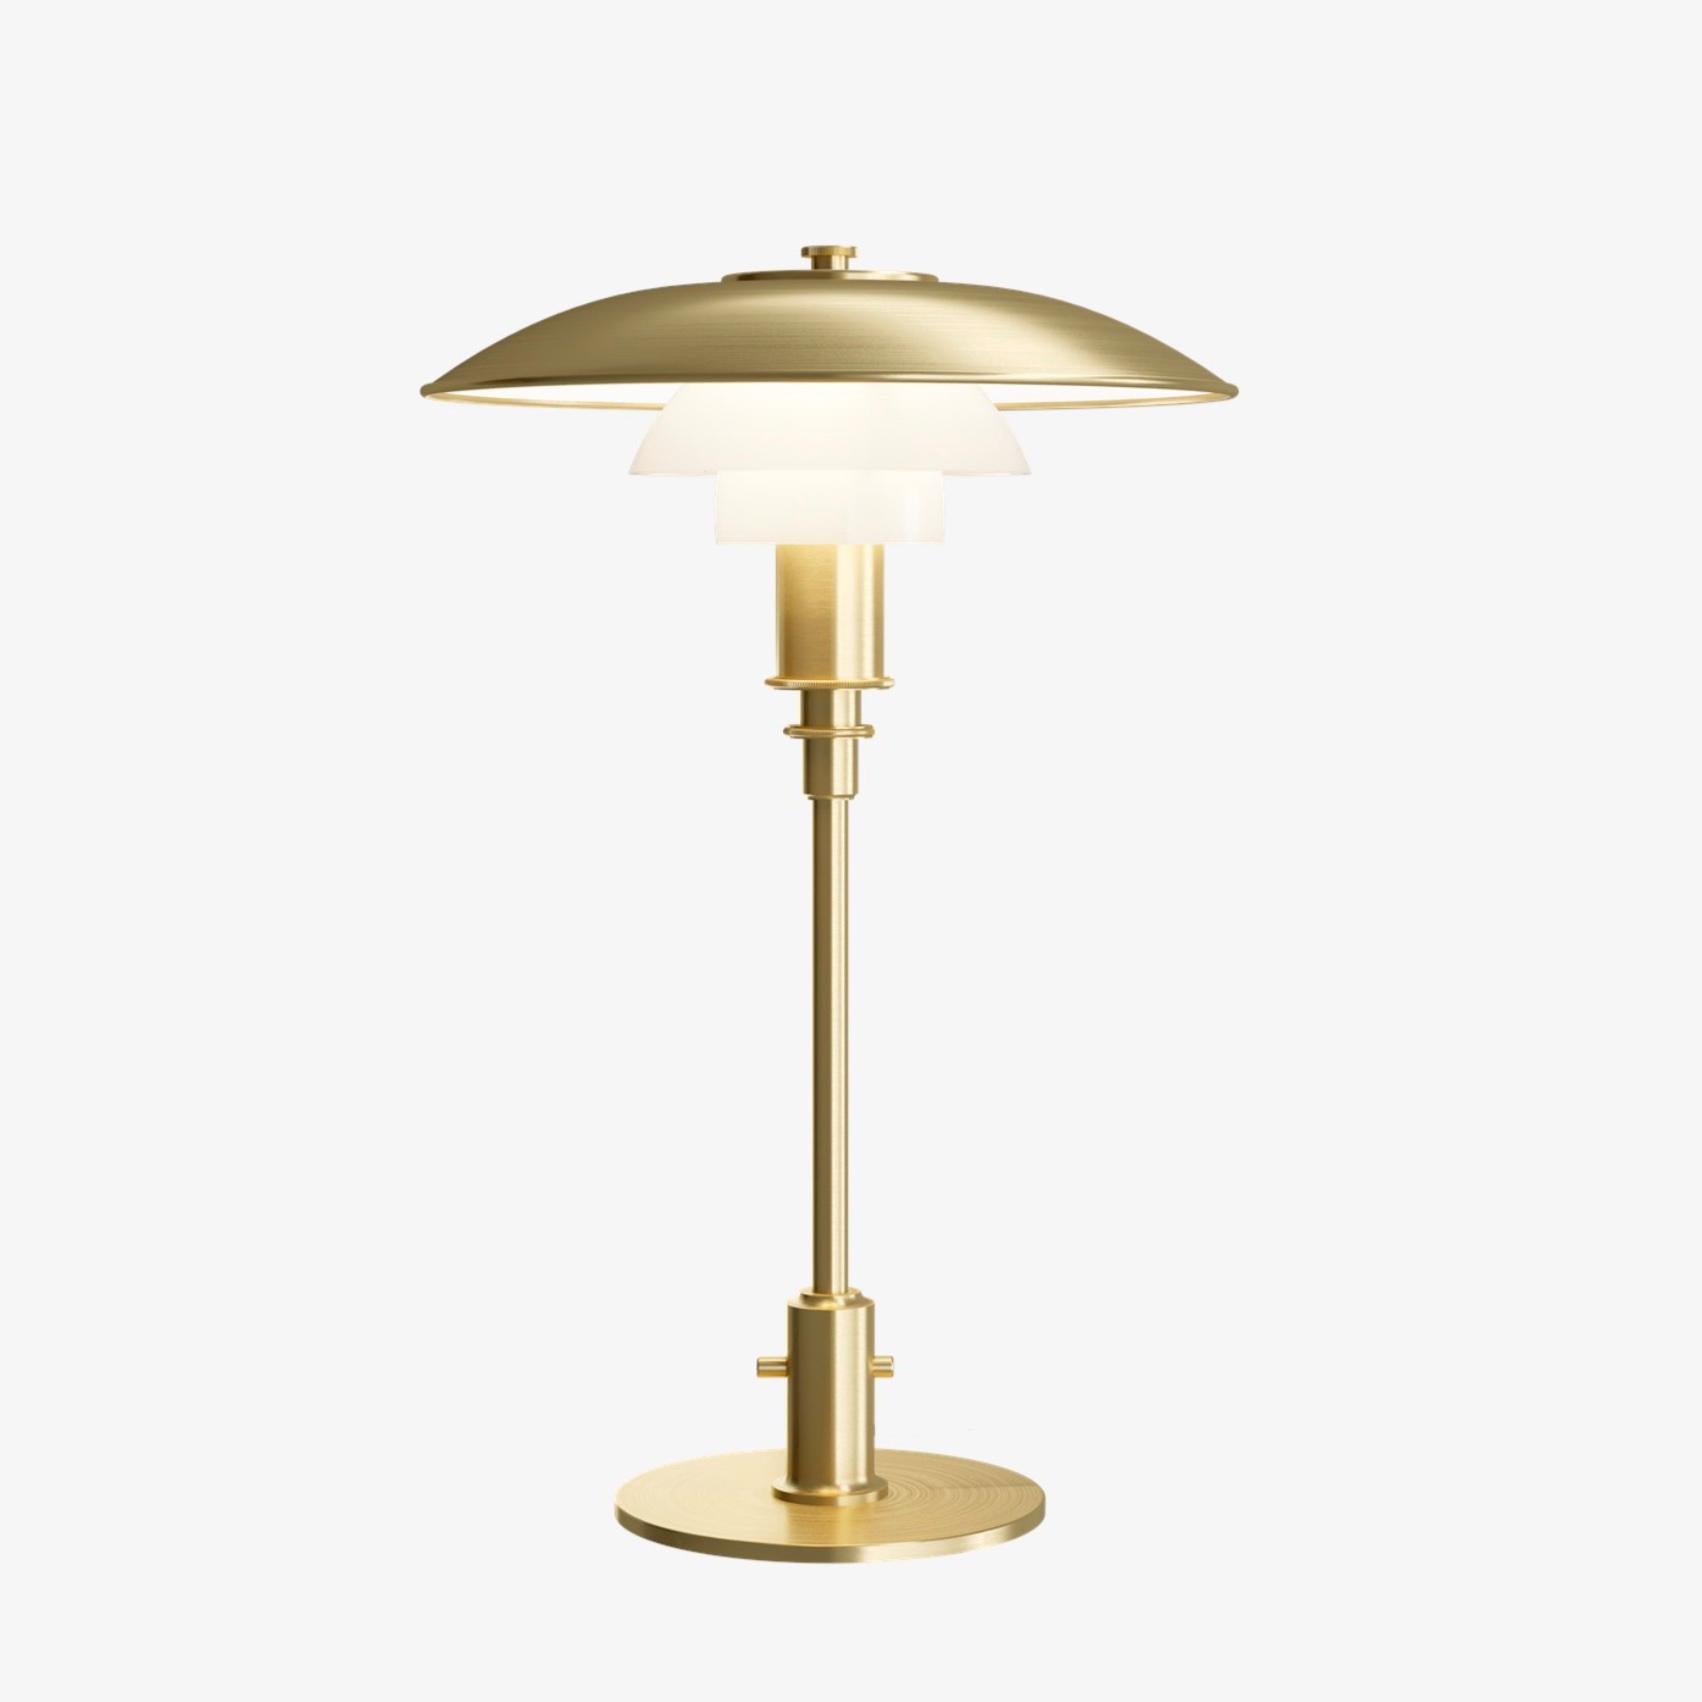 Poul Henningsen PH 3/2 table lamp in brass and opaline glass - limited edition available until the 31st of December 2022. New production.

The PH Limited Edition 2022 Collection adds a touch of elegance to your home with its timeless design